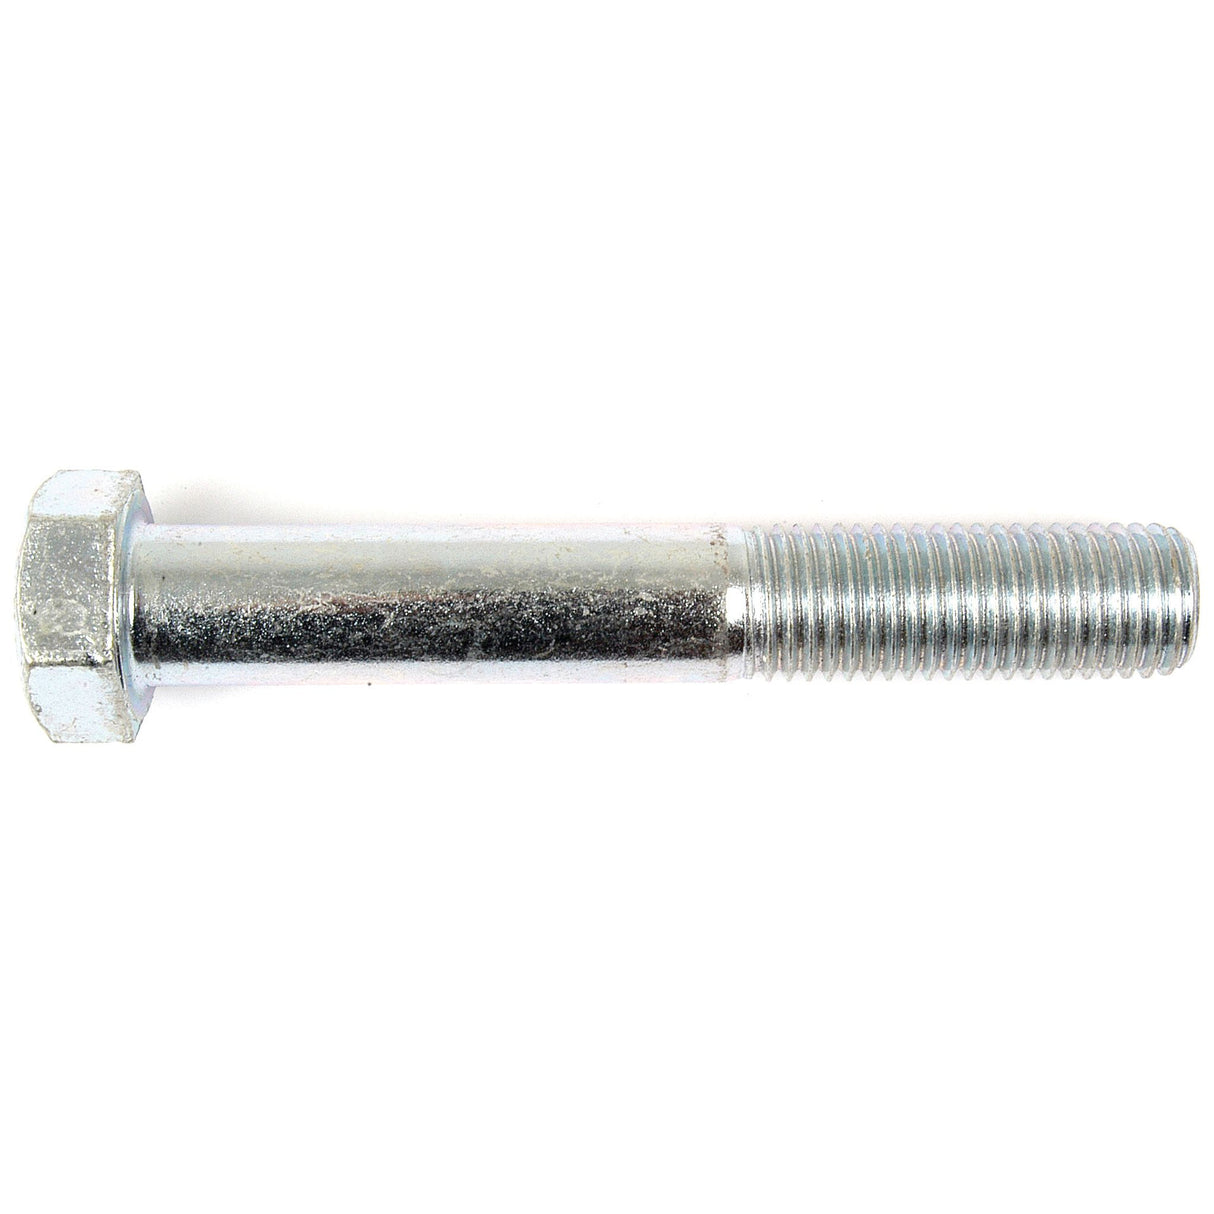 Metric Bolt, Size: M20 x 130mm (Din 931)
 - S.8209 - Massey Tractor Parts